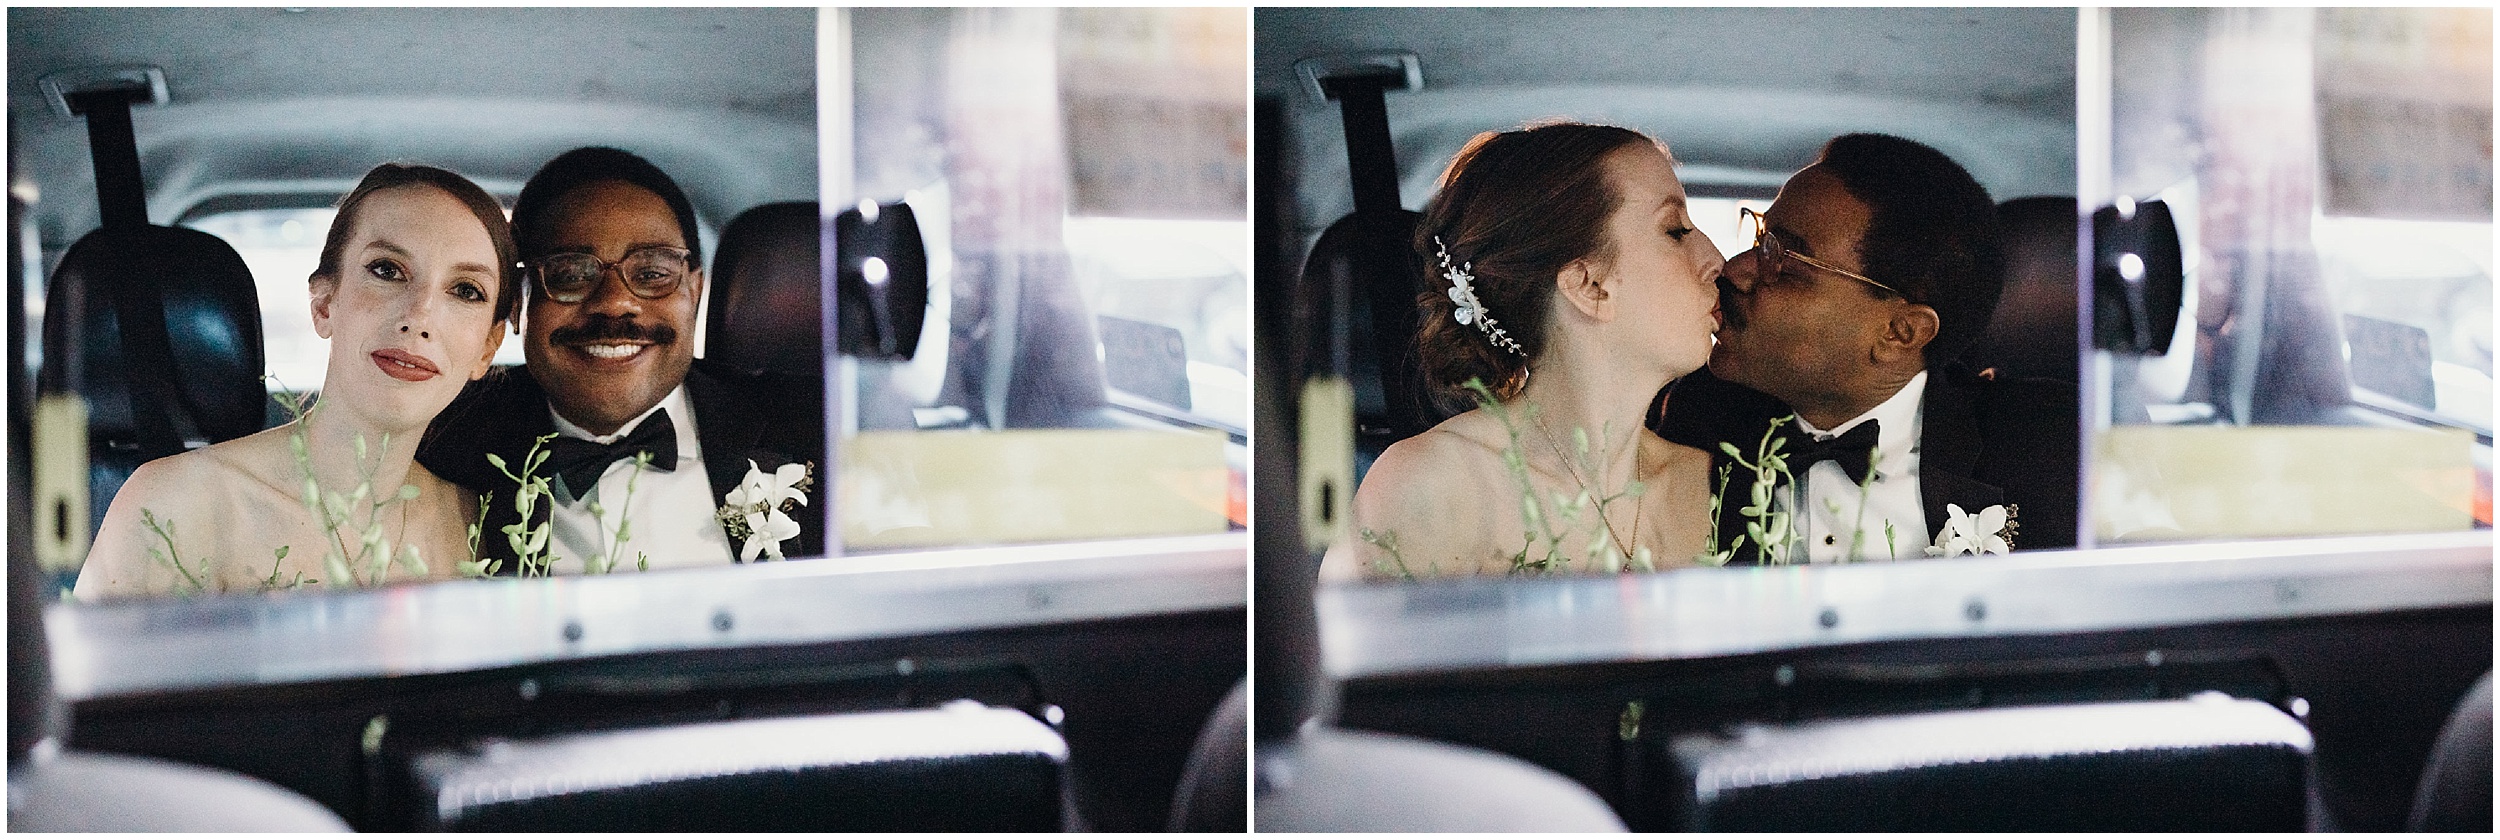 bride and groom portrait in a taxi in new york city, ny